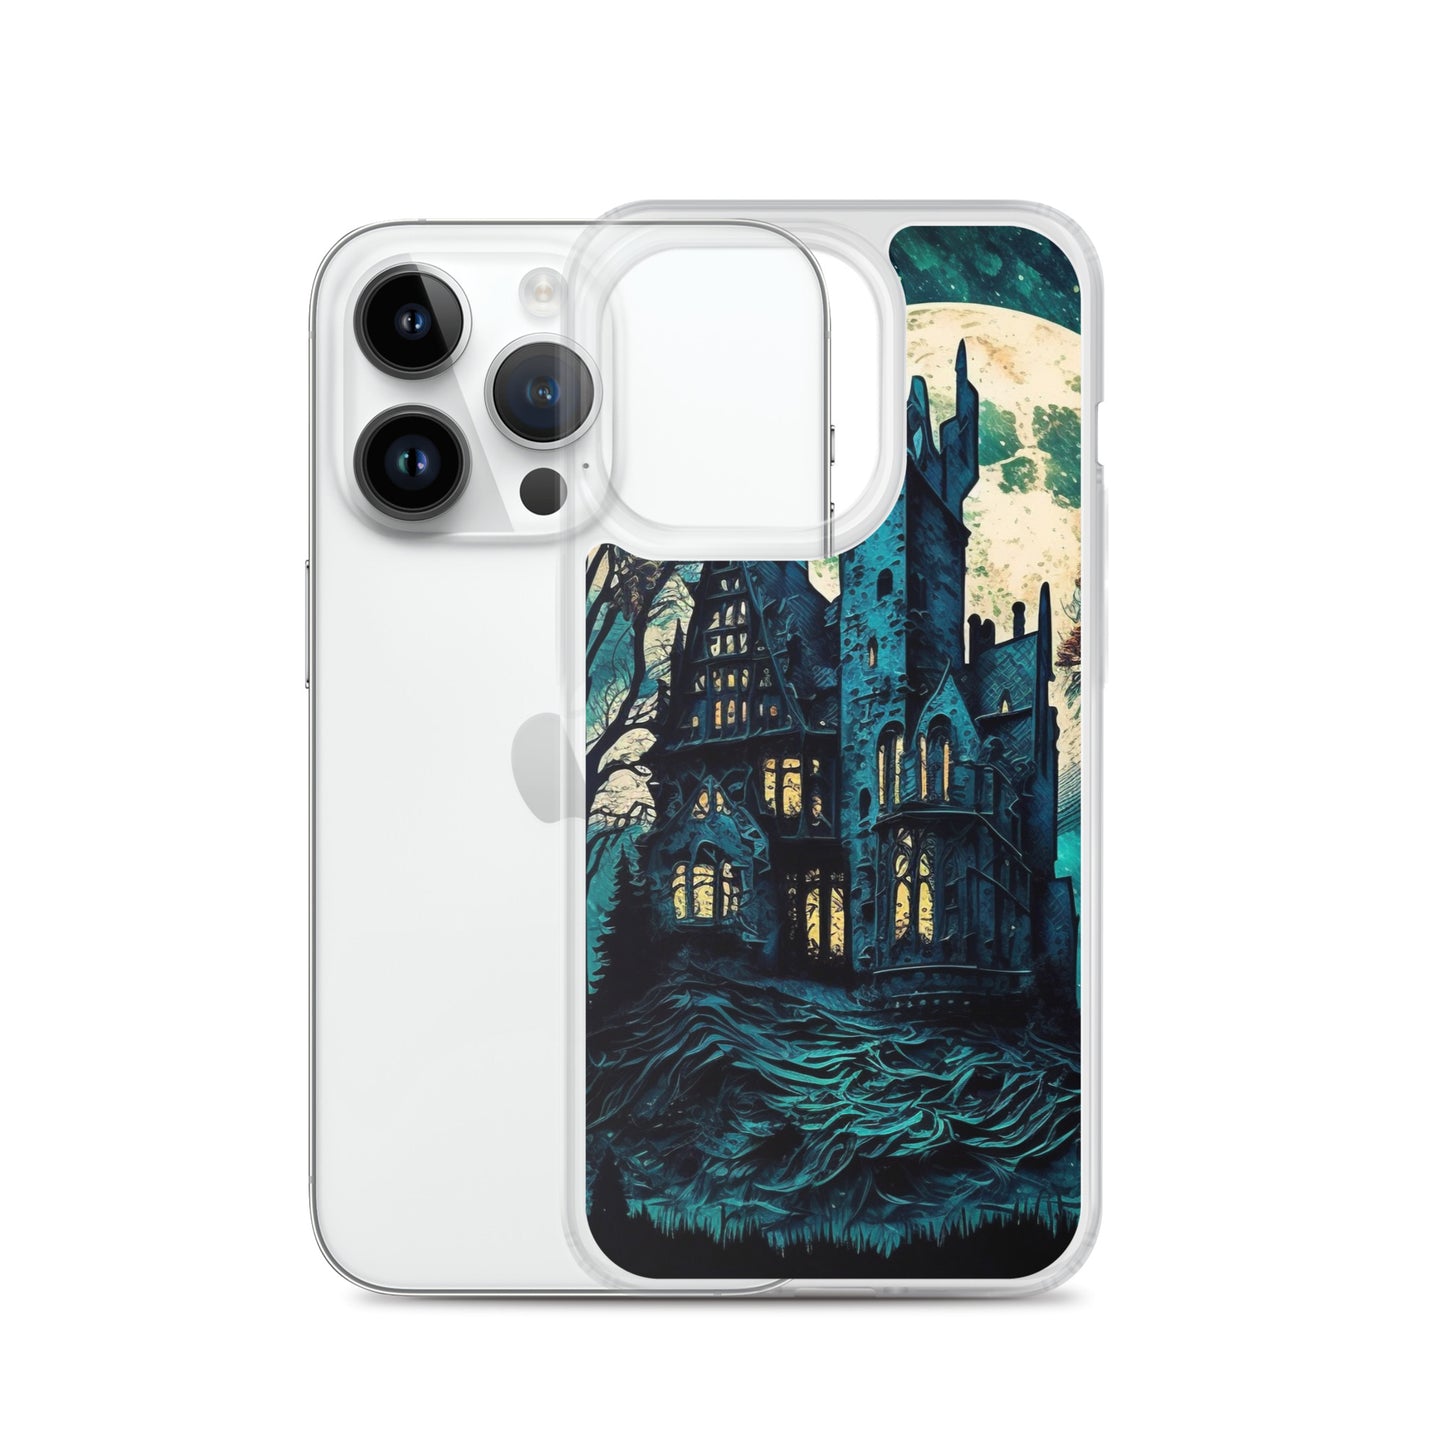 Haunted House iPhone Case